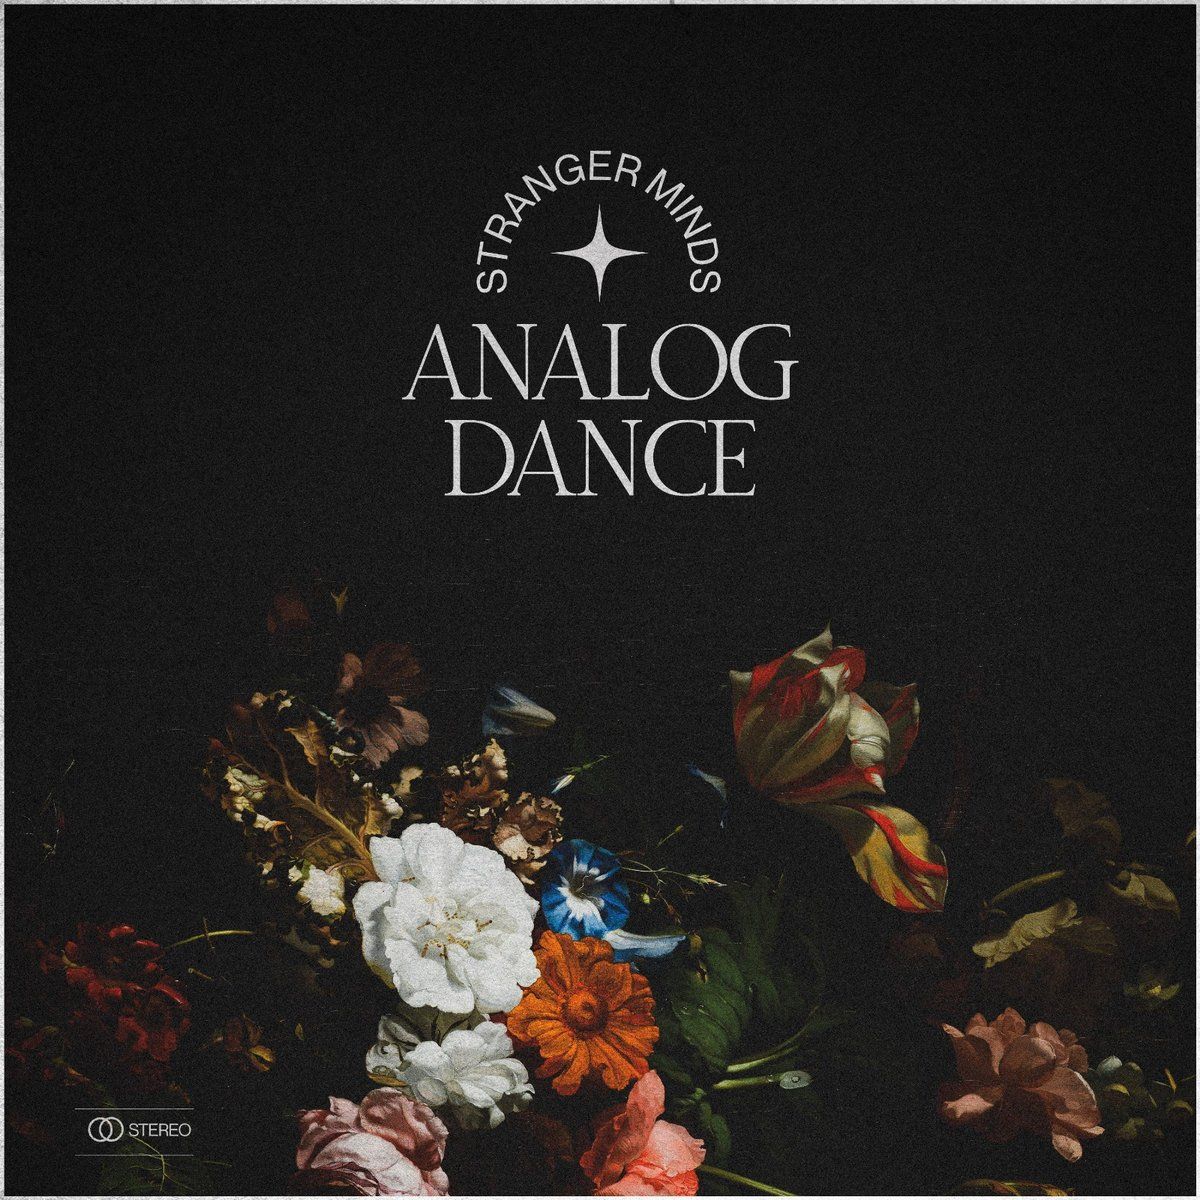 Listen to the Iridescent Synth Dream of London Darkwave Project Analog Dance’s “Stranger Minds” LP